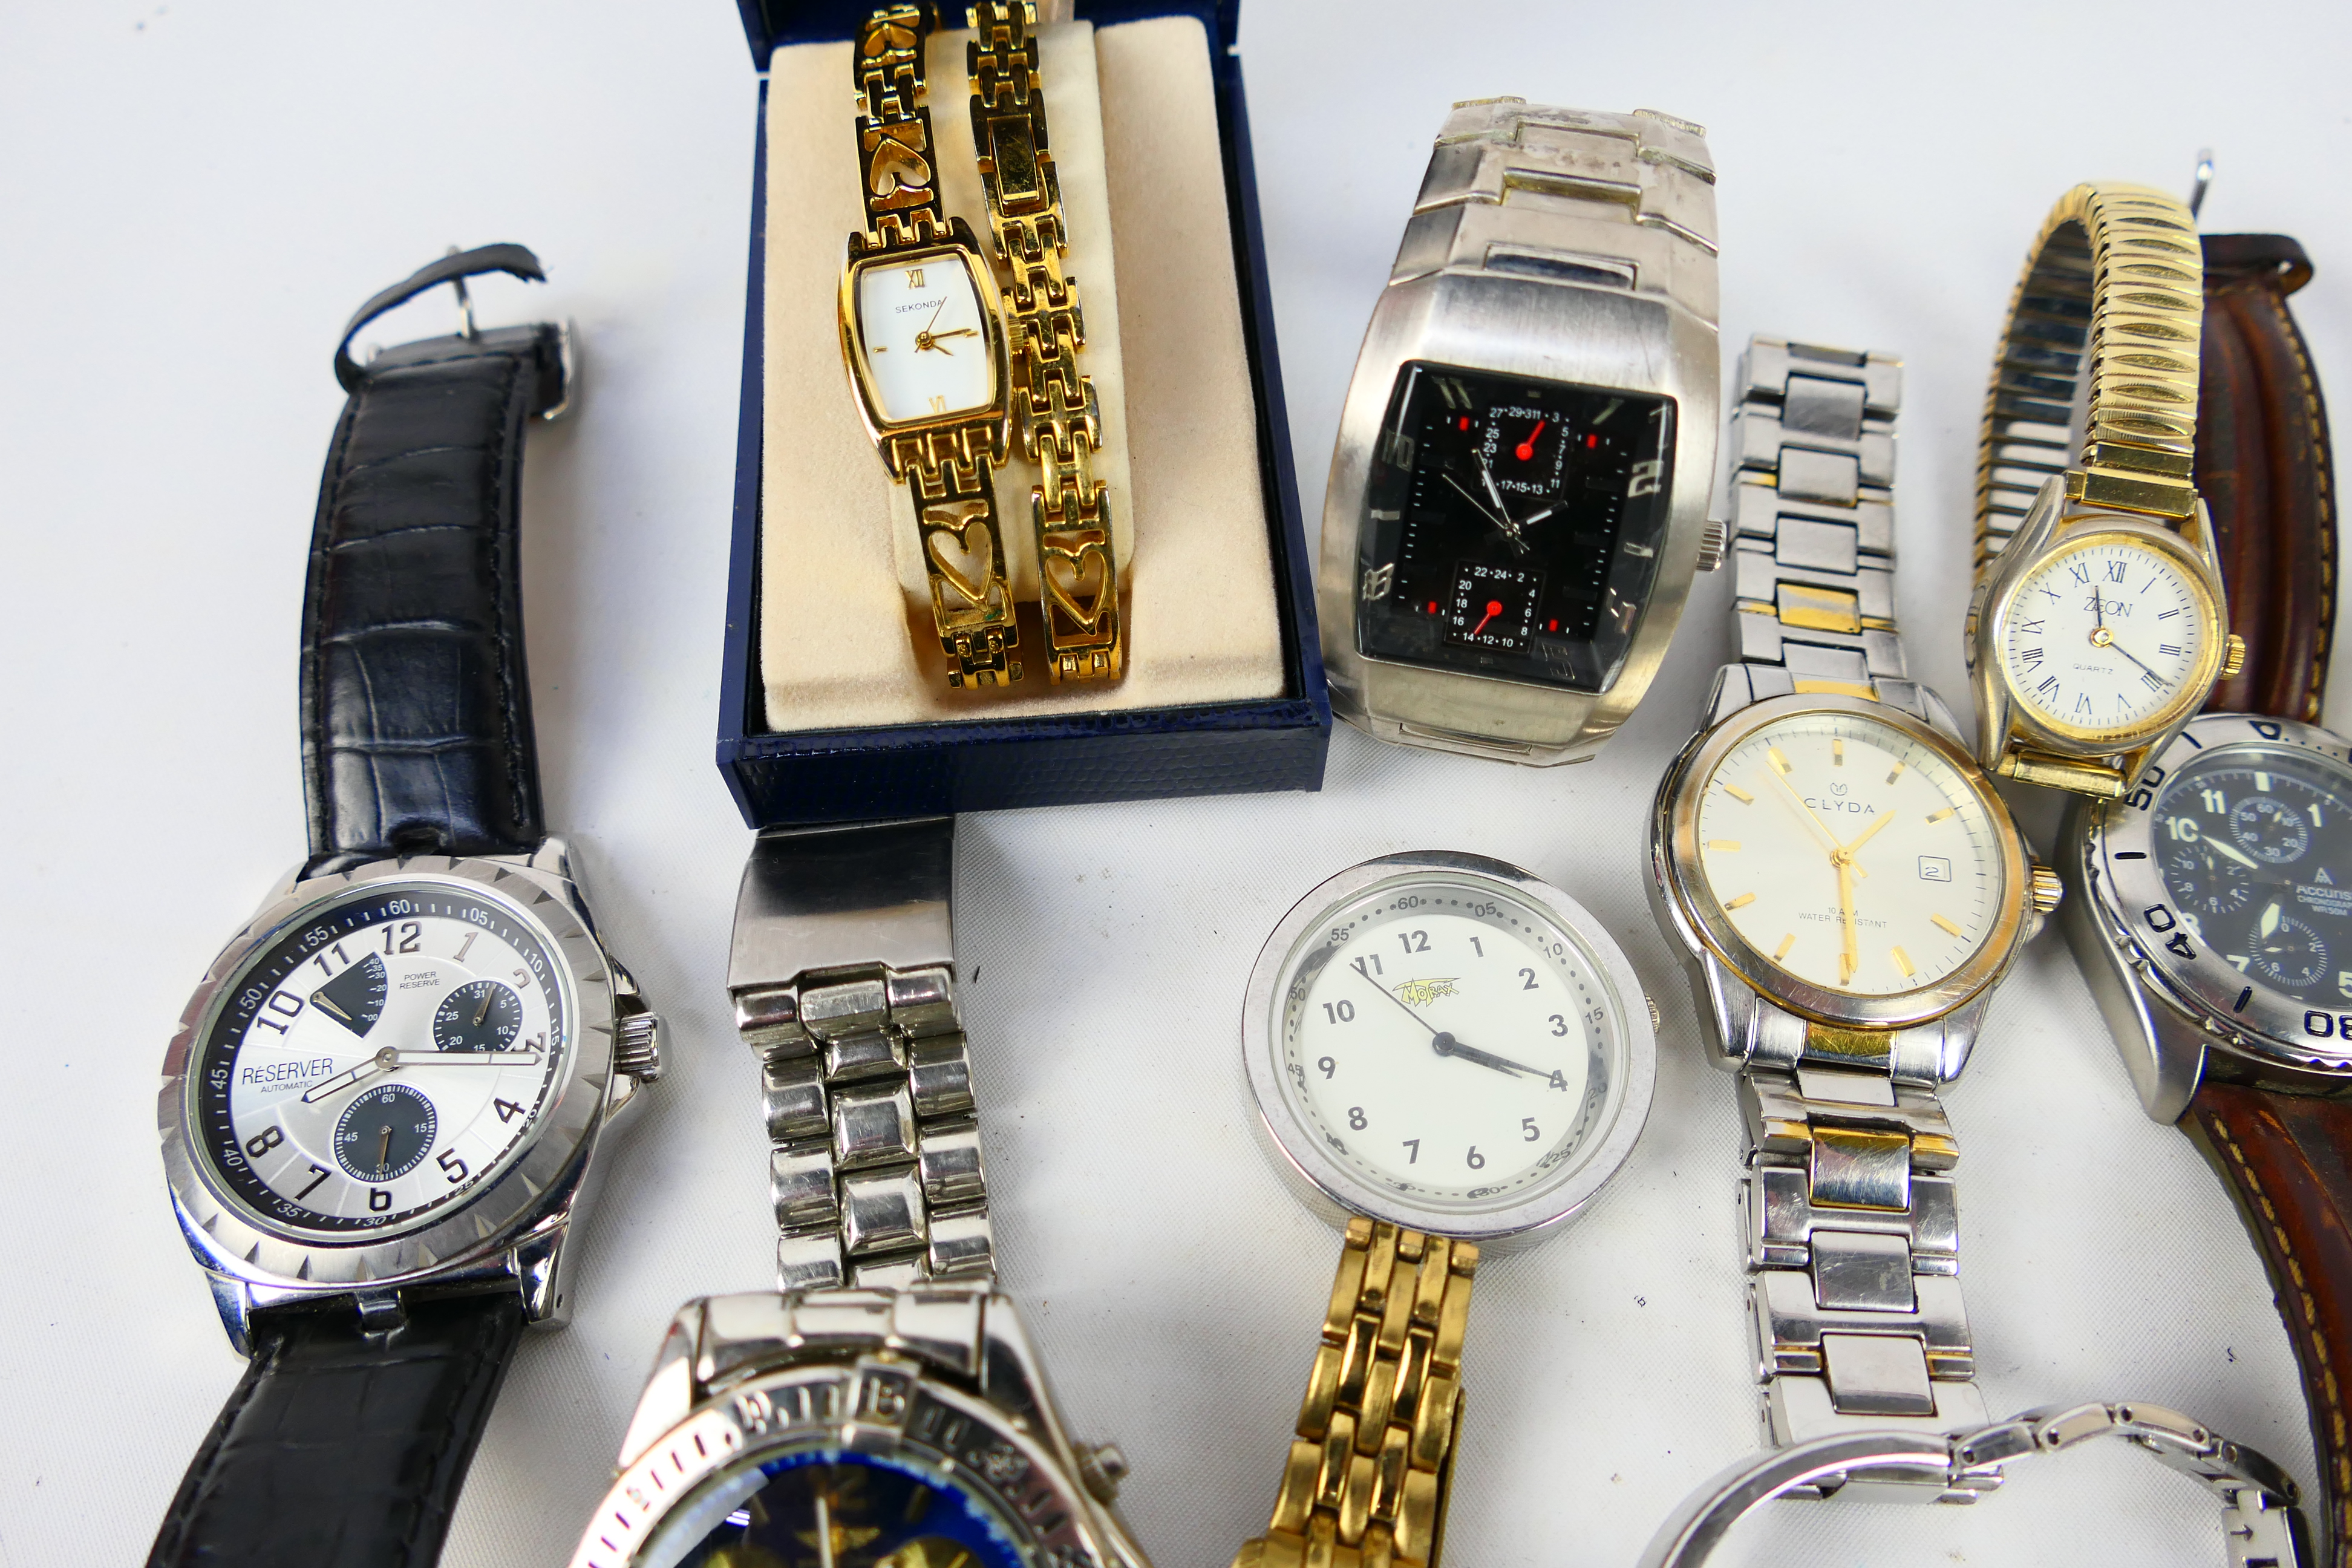 A collection of various wrist watches to include Zeon, Sekonda, Clyda and other. - Image 3 of 6